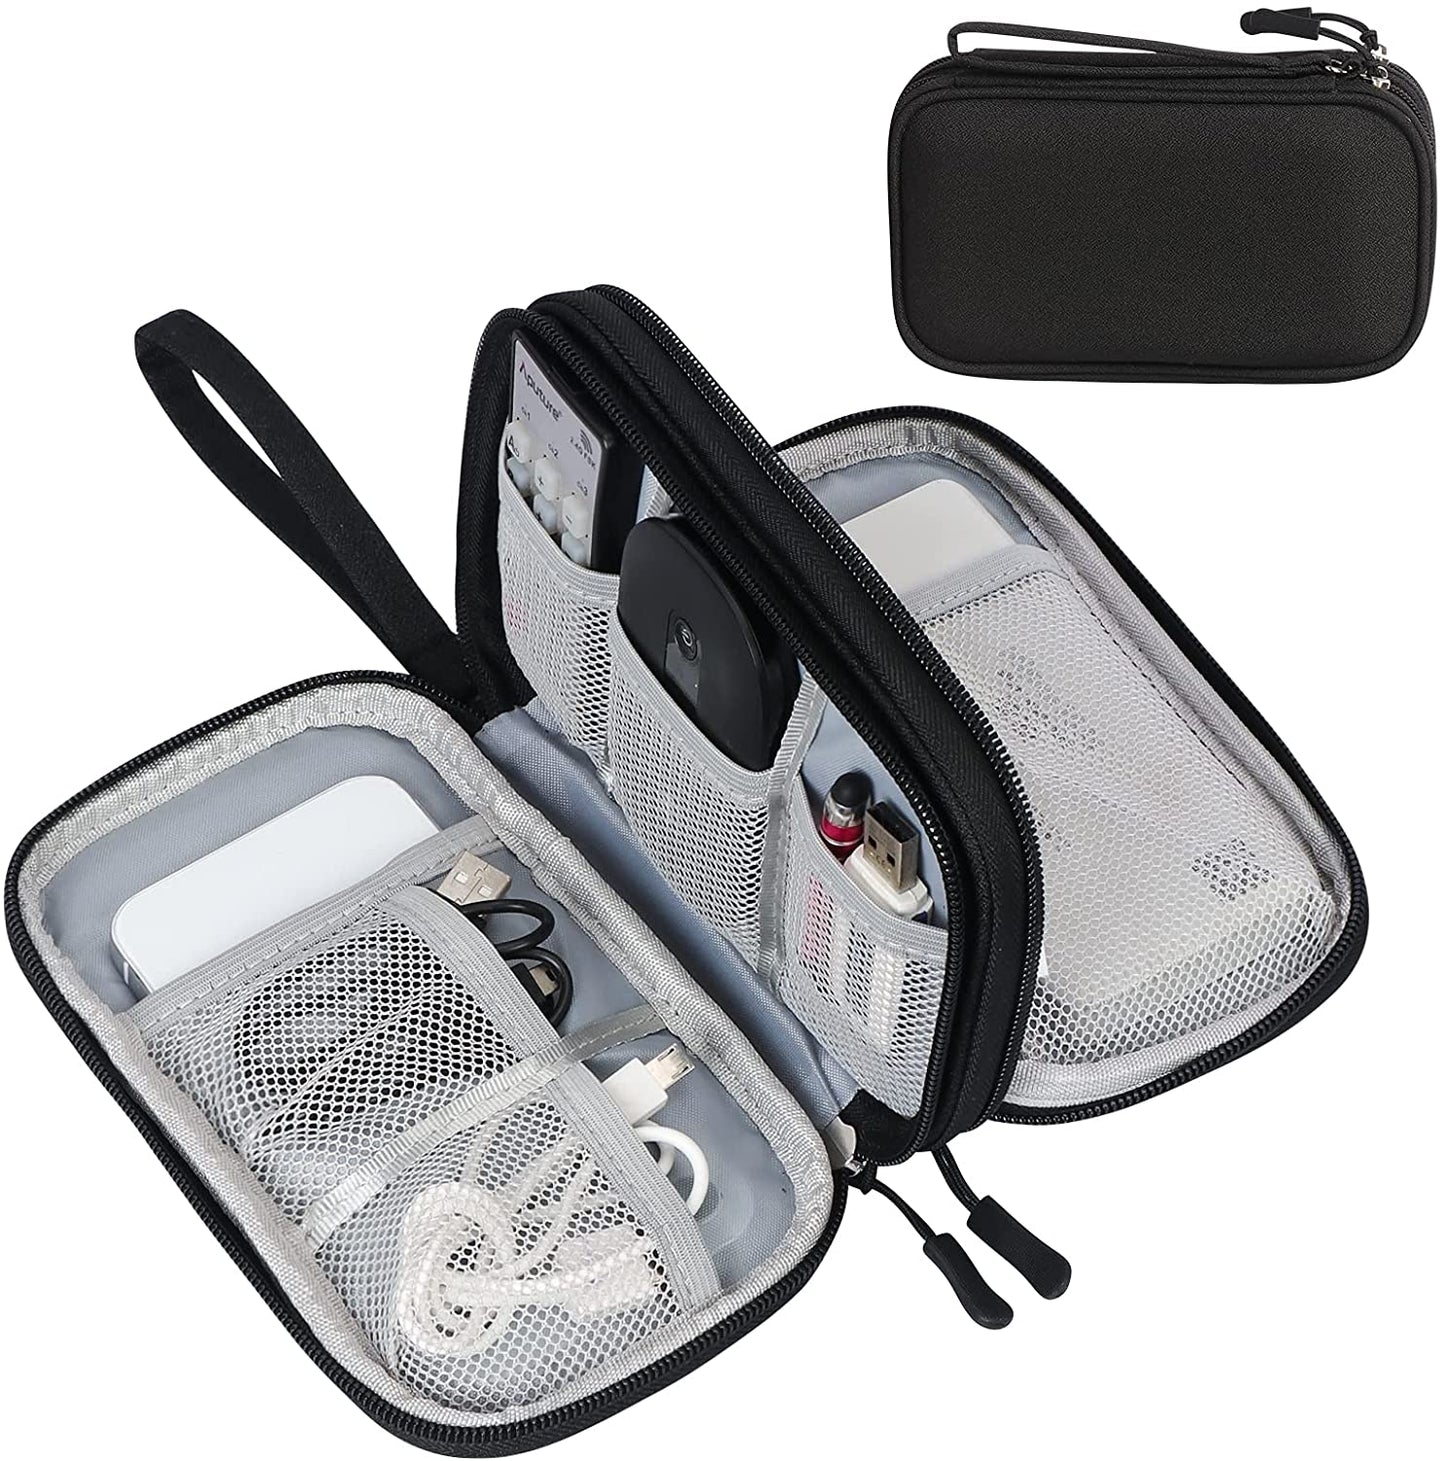 Portable Waterproof Travel Cable Organizer Pouch - Double Layer Electronic Accessories Carry Case for Cord, Charger, Phone, and Earphone Storage - Black